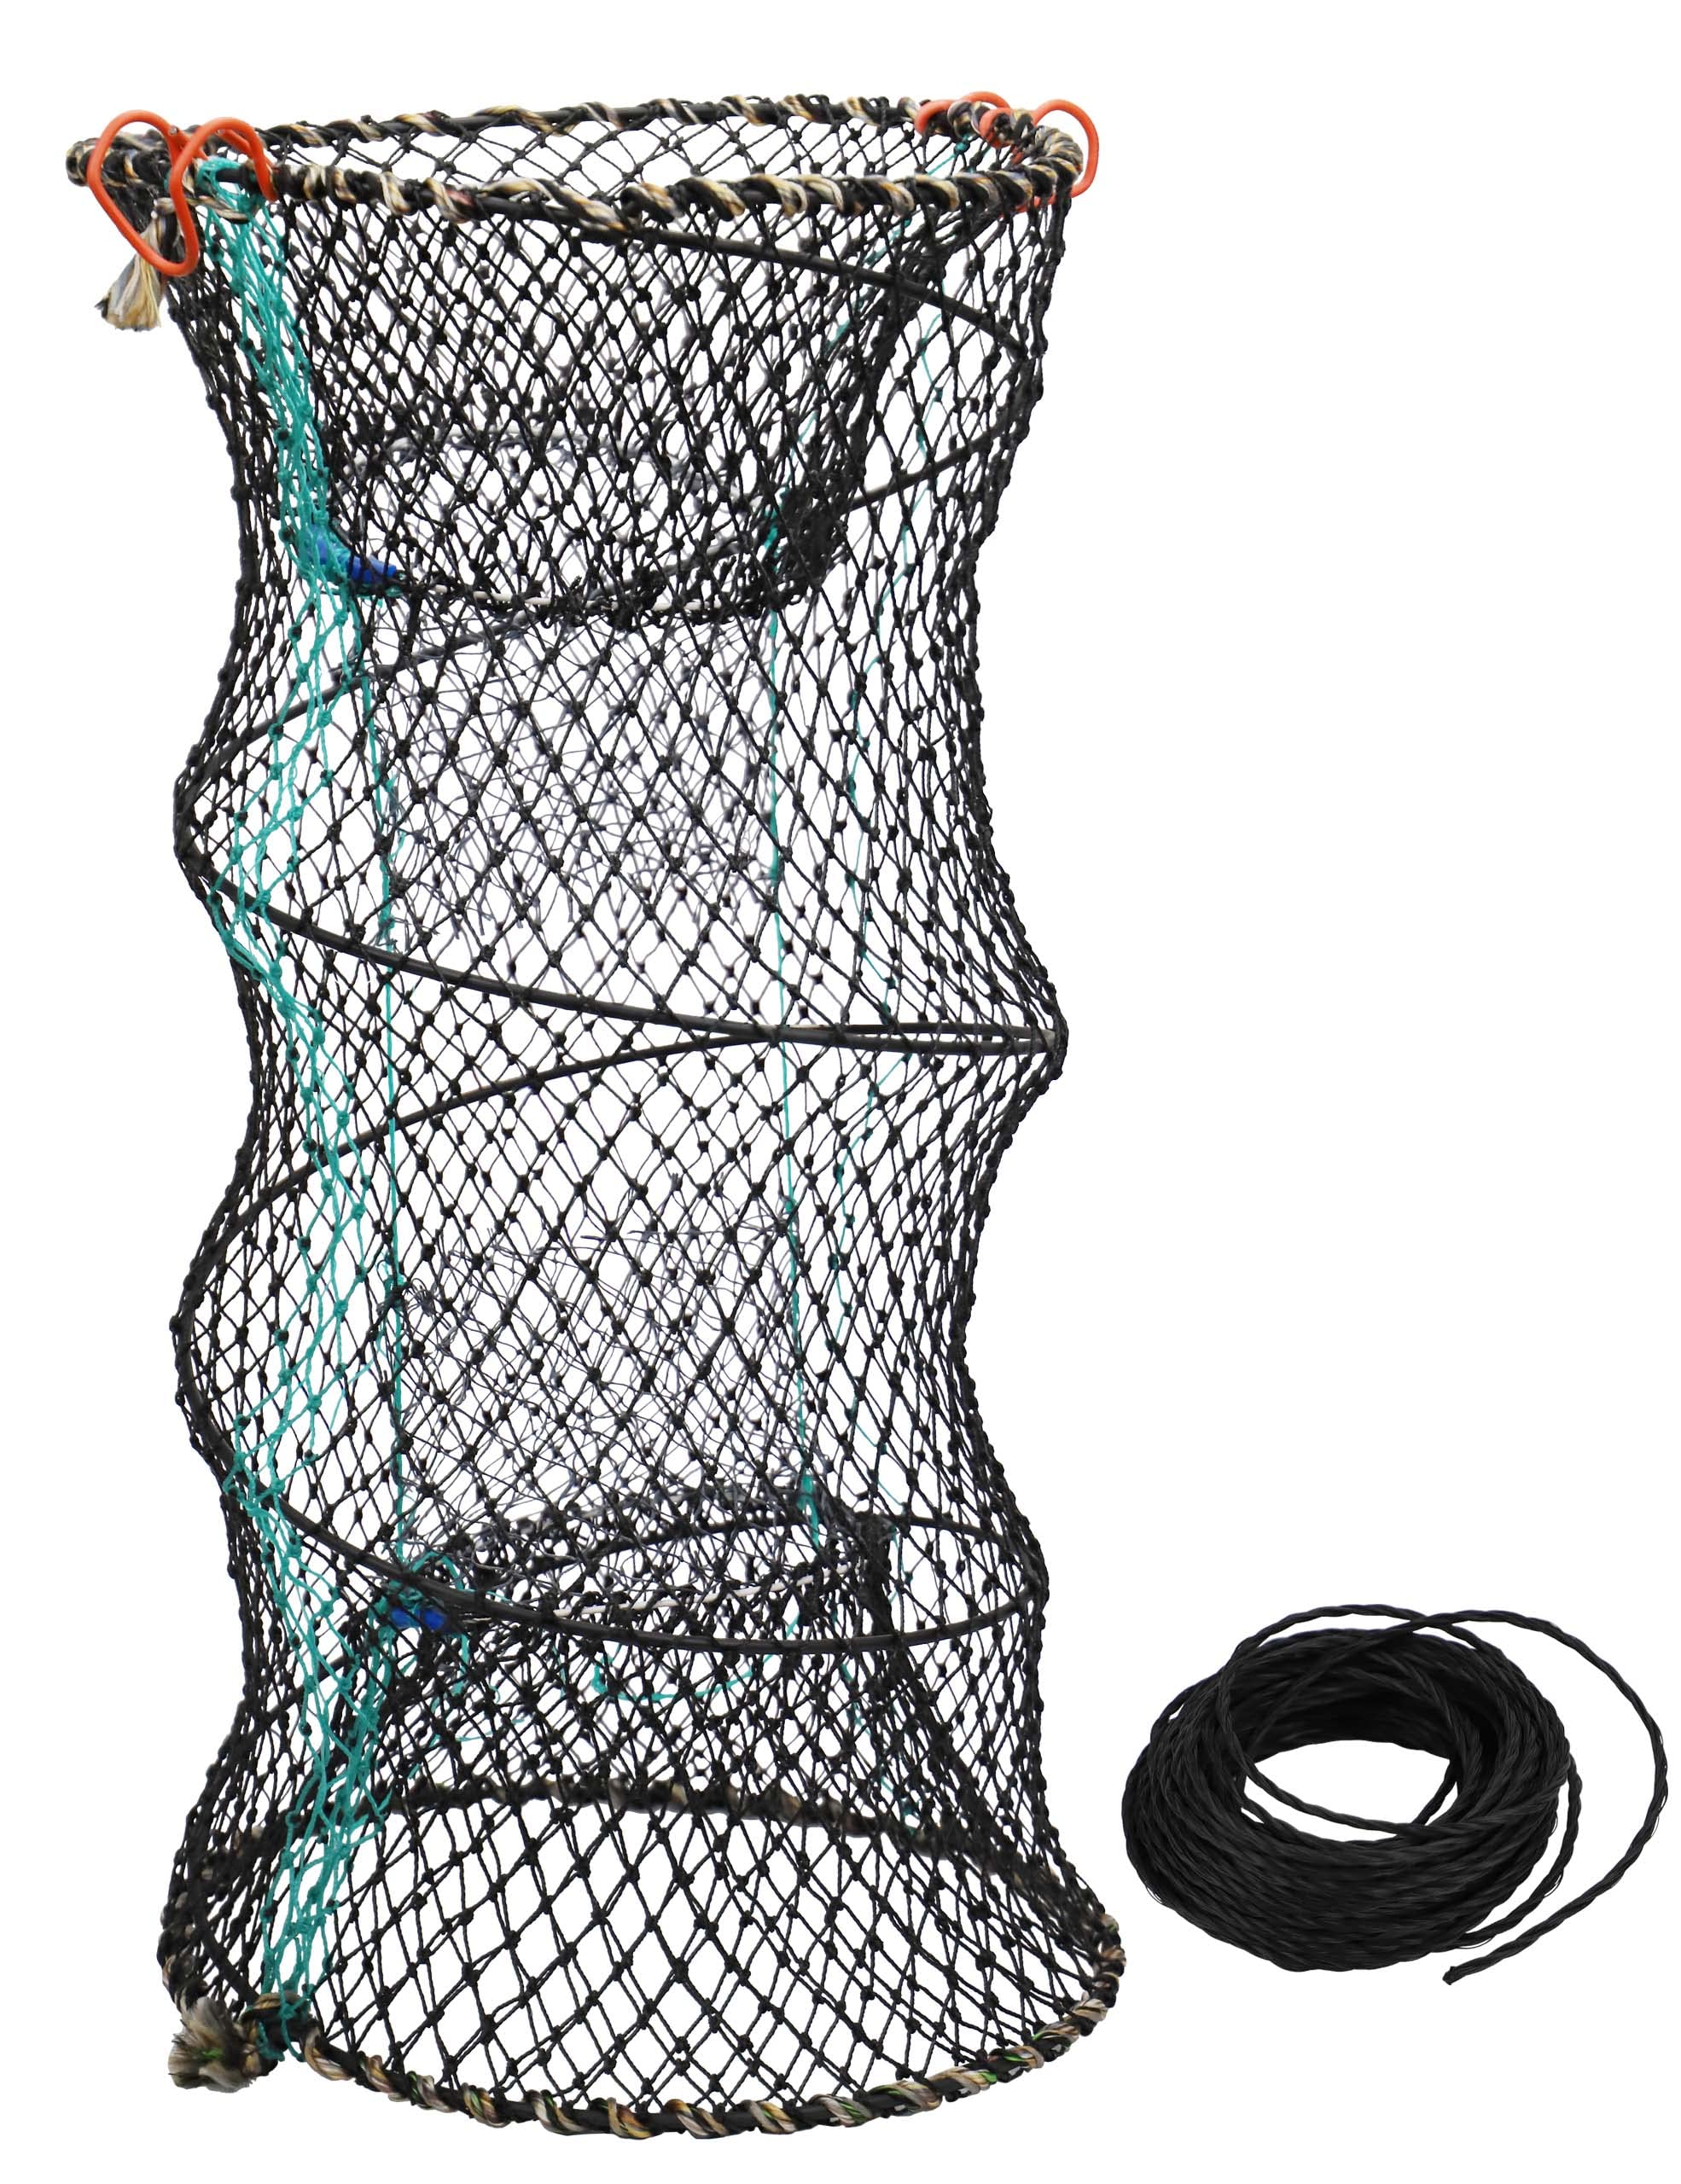 Hlotmeky Crab Trap Minnow Trap Fishing Bait Traps with 10m Hand Rope,  Folded Lobster Crawfish Fishing